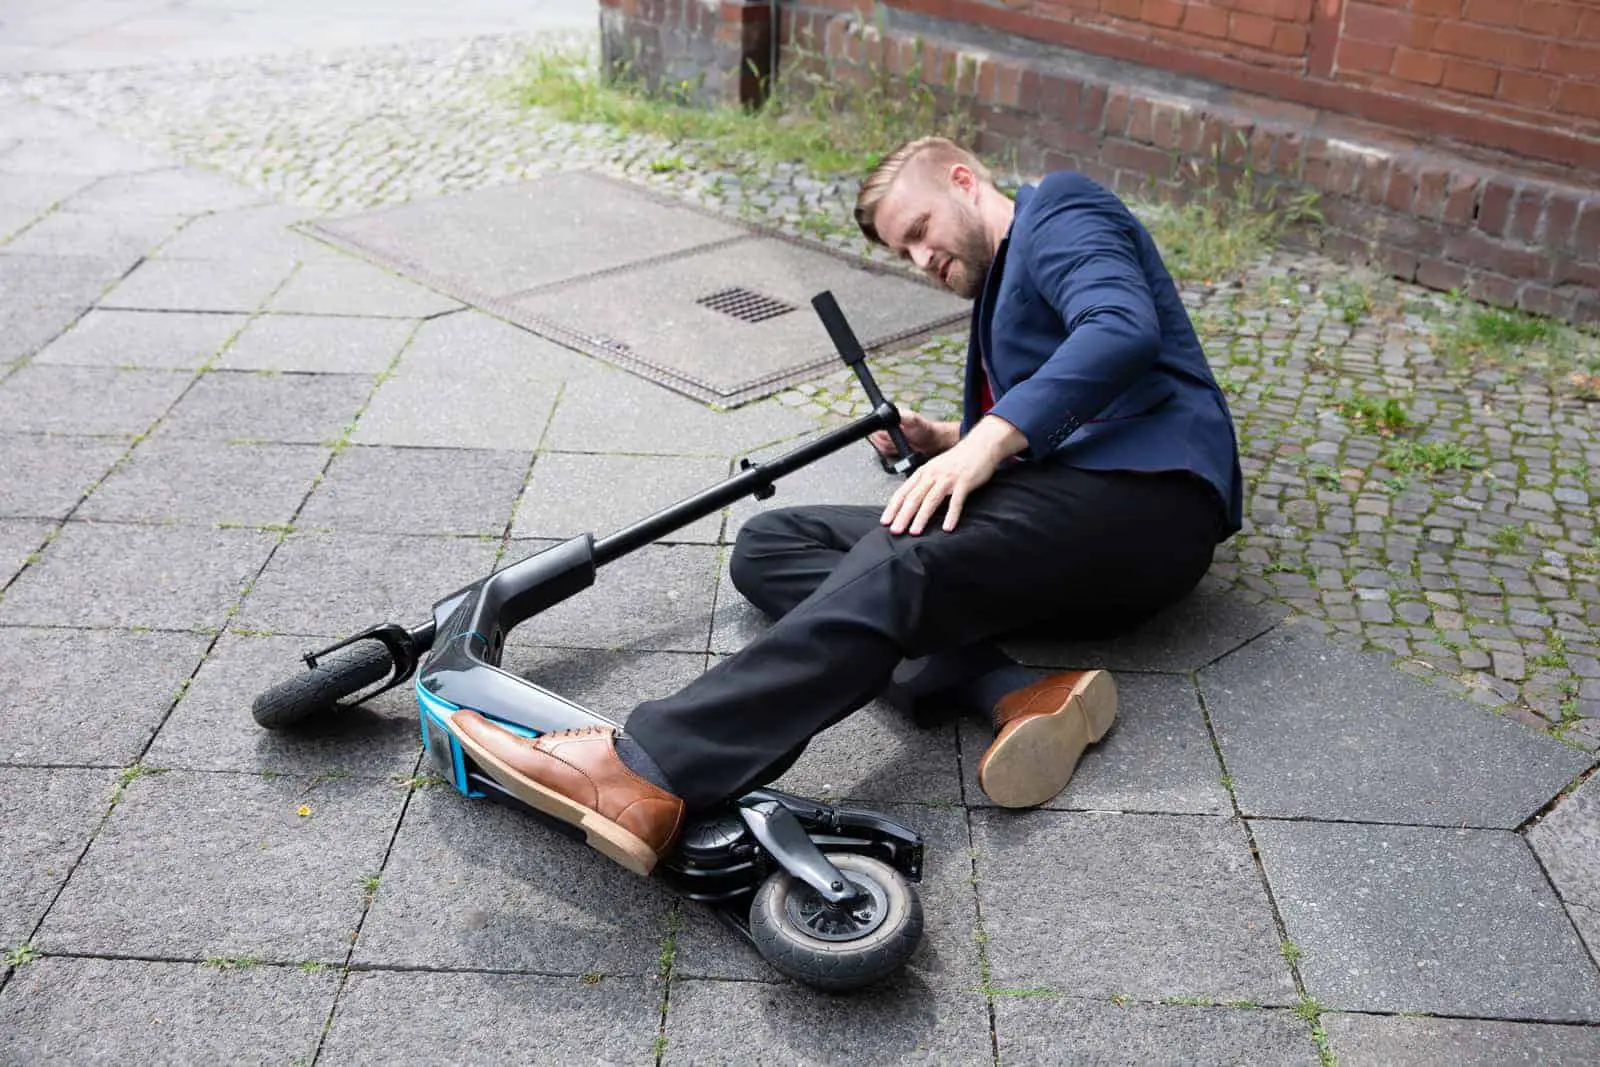 Accidents-With-An-Electric-Scooter